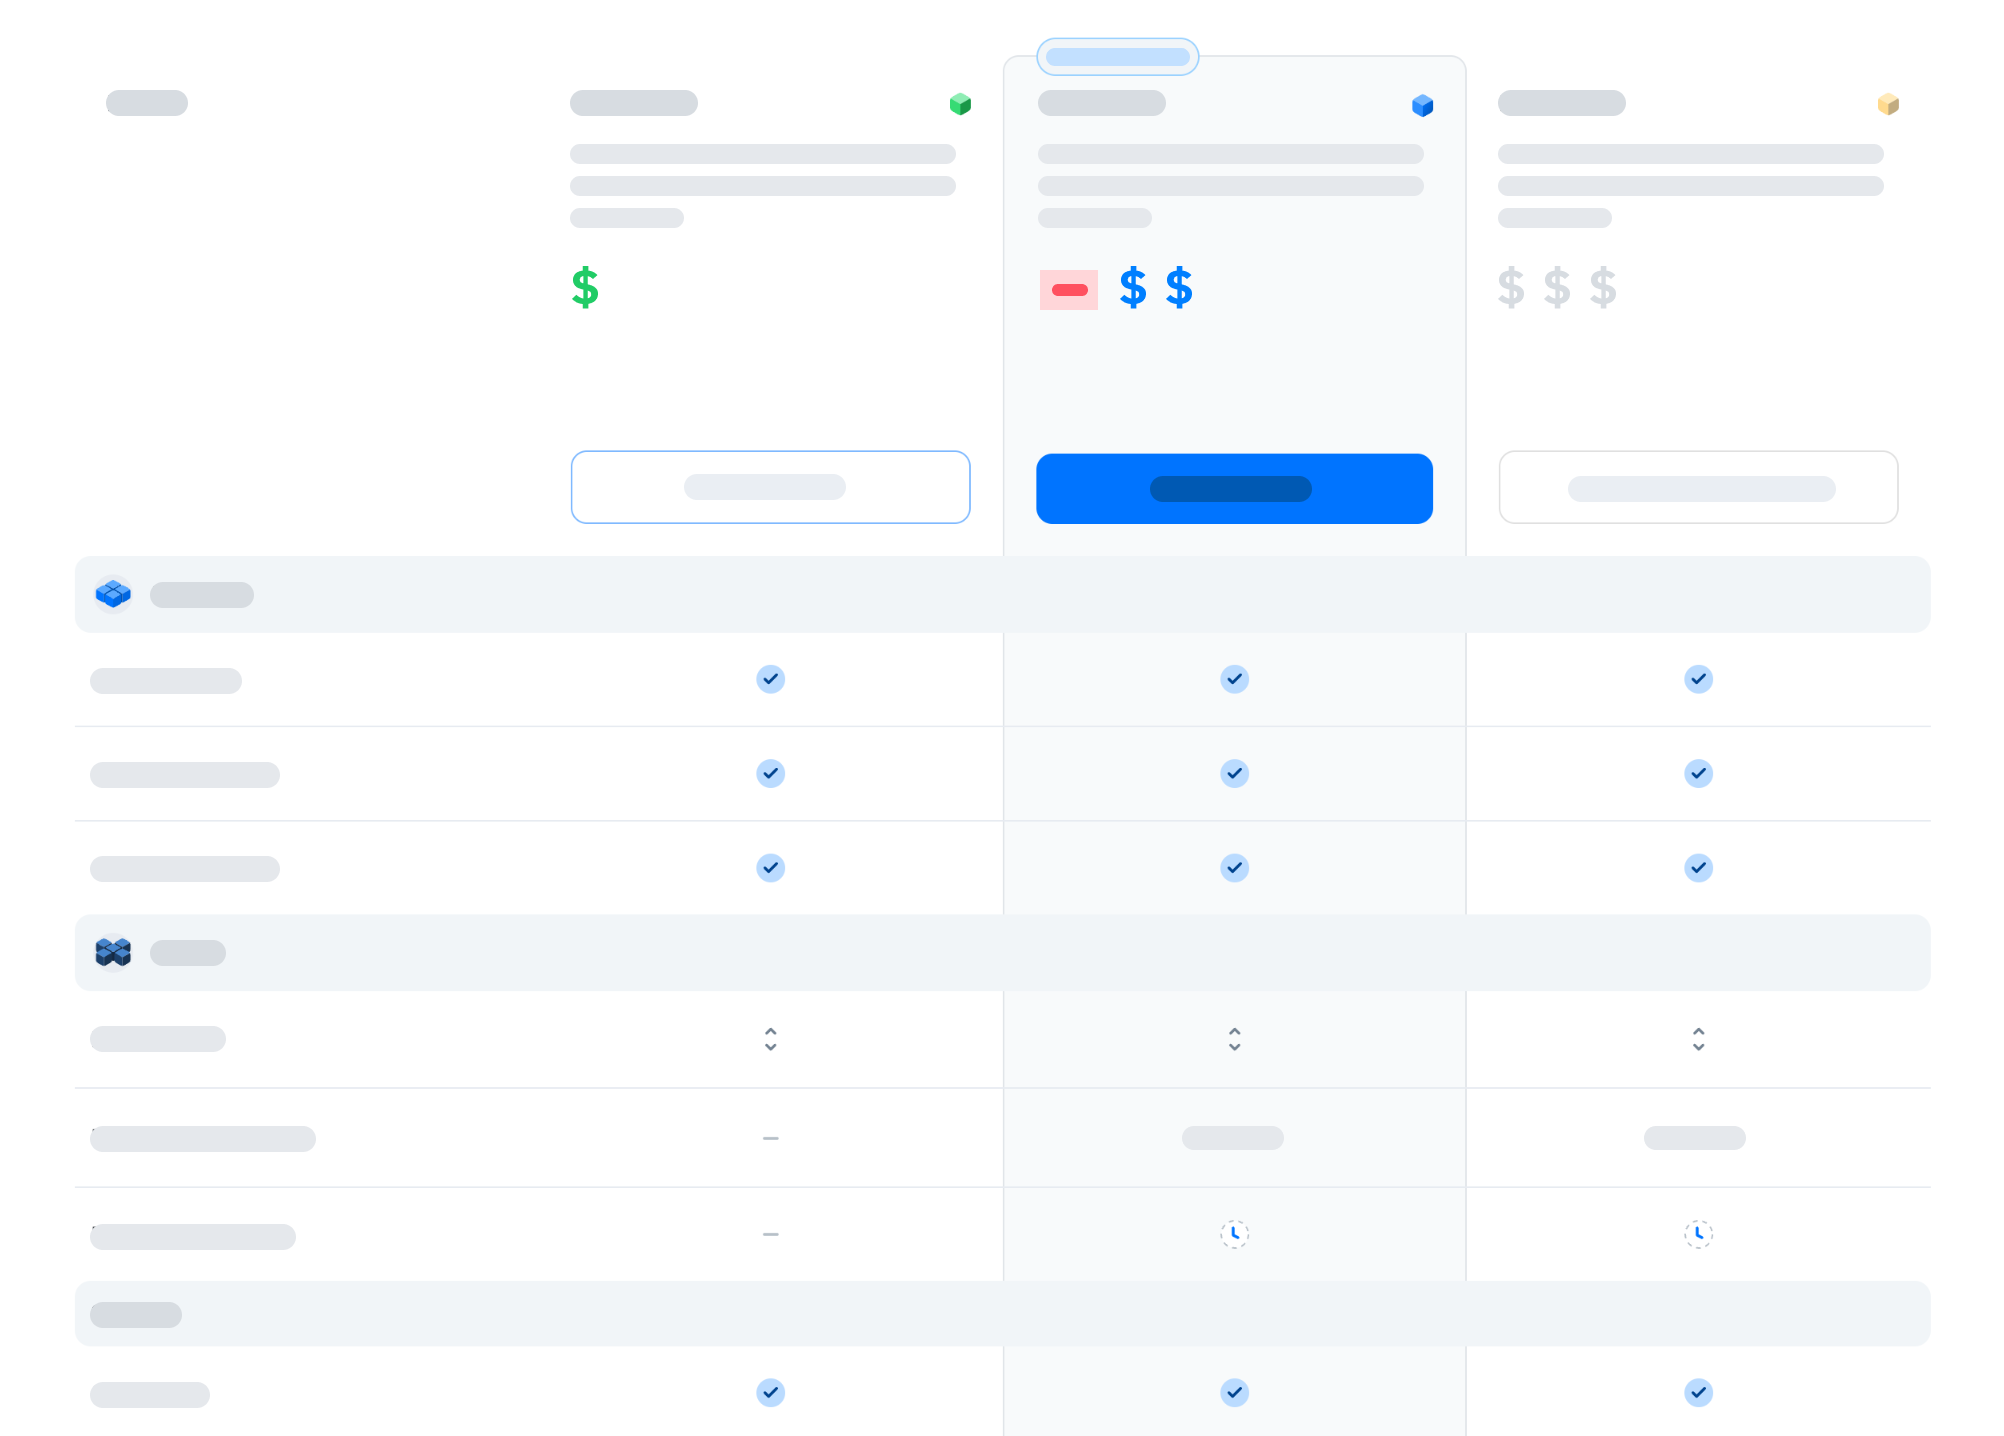 Illustration of MUI's pricing page.